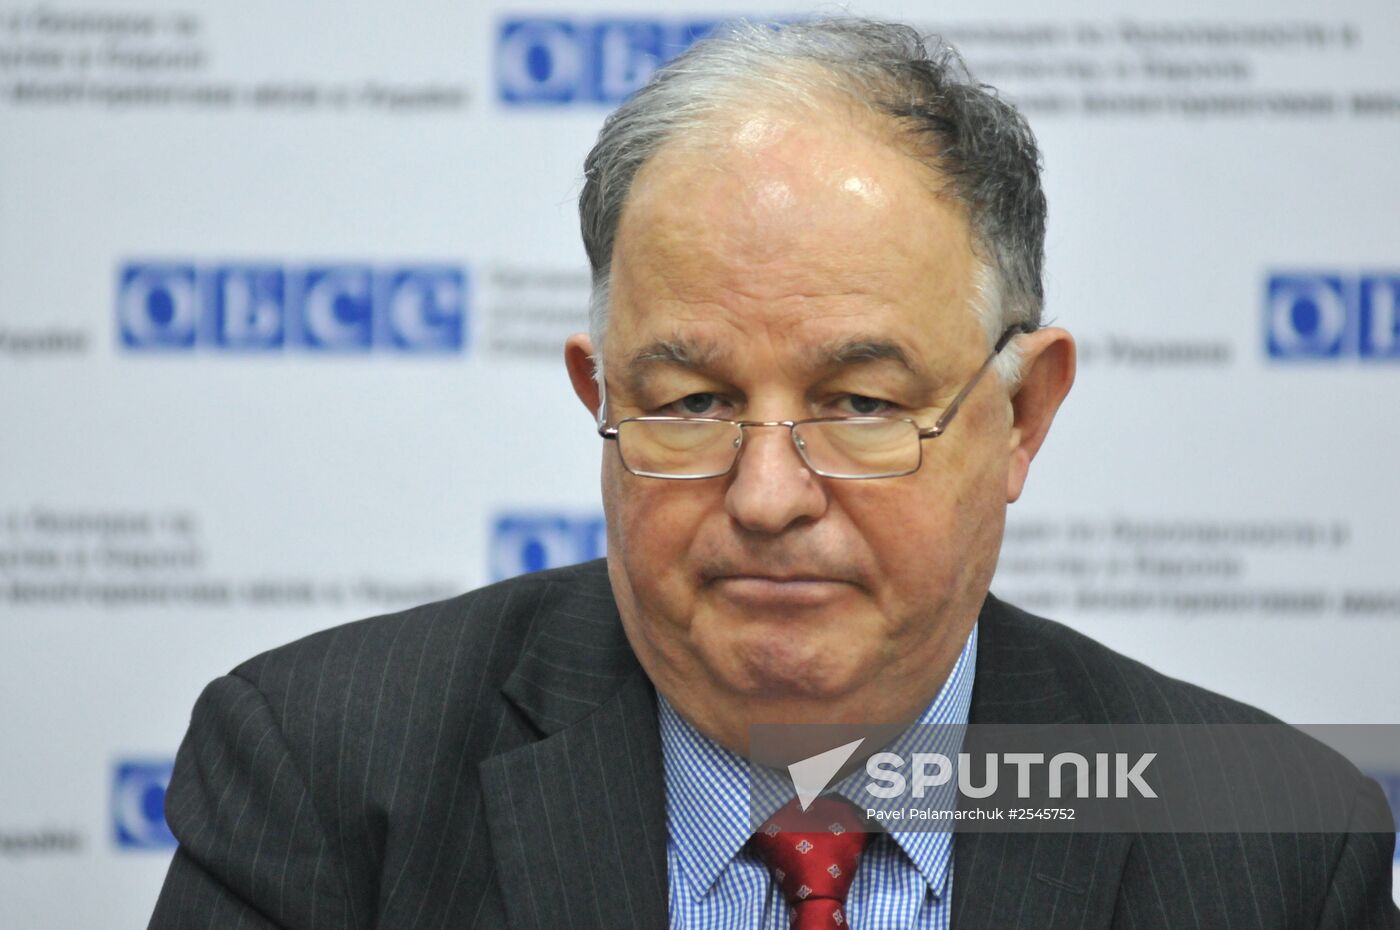 Press briefing in Lviv by Ertugrul Apakan, Chief Monitor of the OSCE Special Monitoring Mission to Ukraine